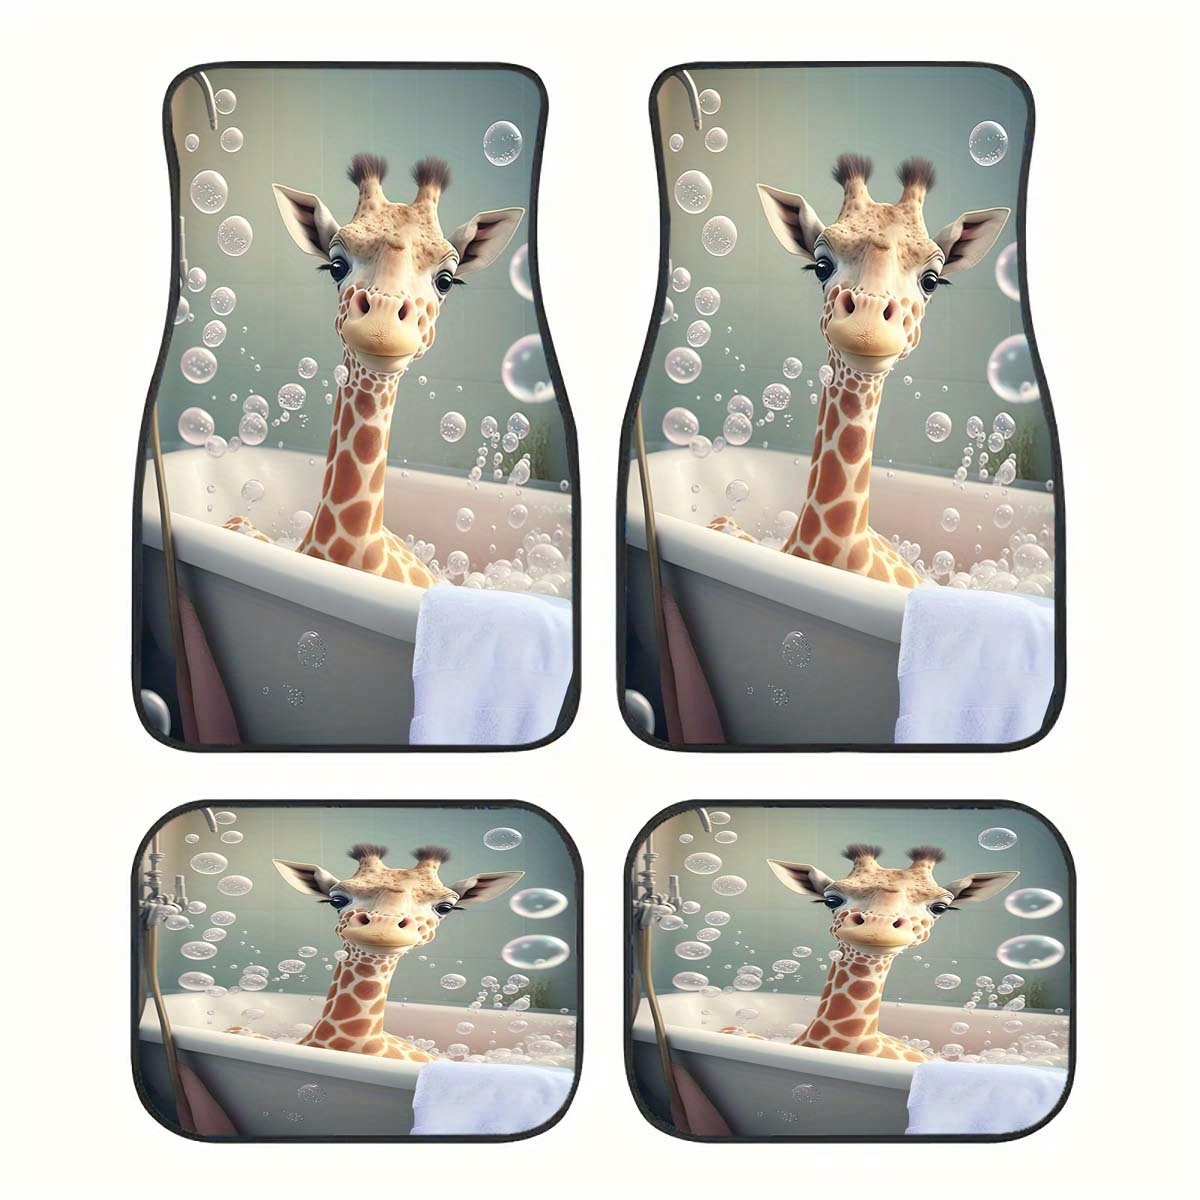 

Cute Giraffe Print Universal Car Floor Mats (1/4 Pcs) - Non-slip, Durable, Easy To Clean Polyester Carpet For All Seasons - Fits Any Car